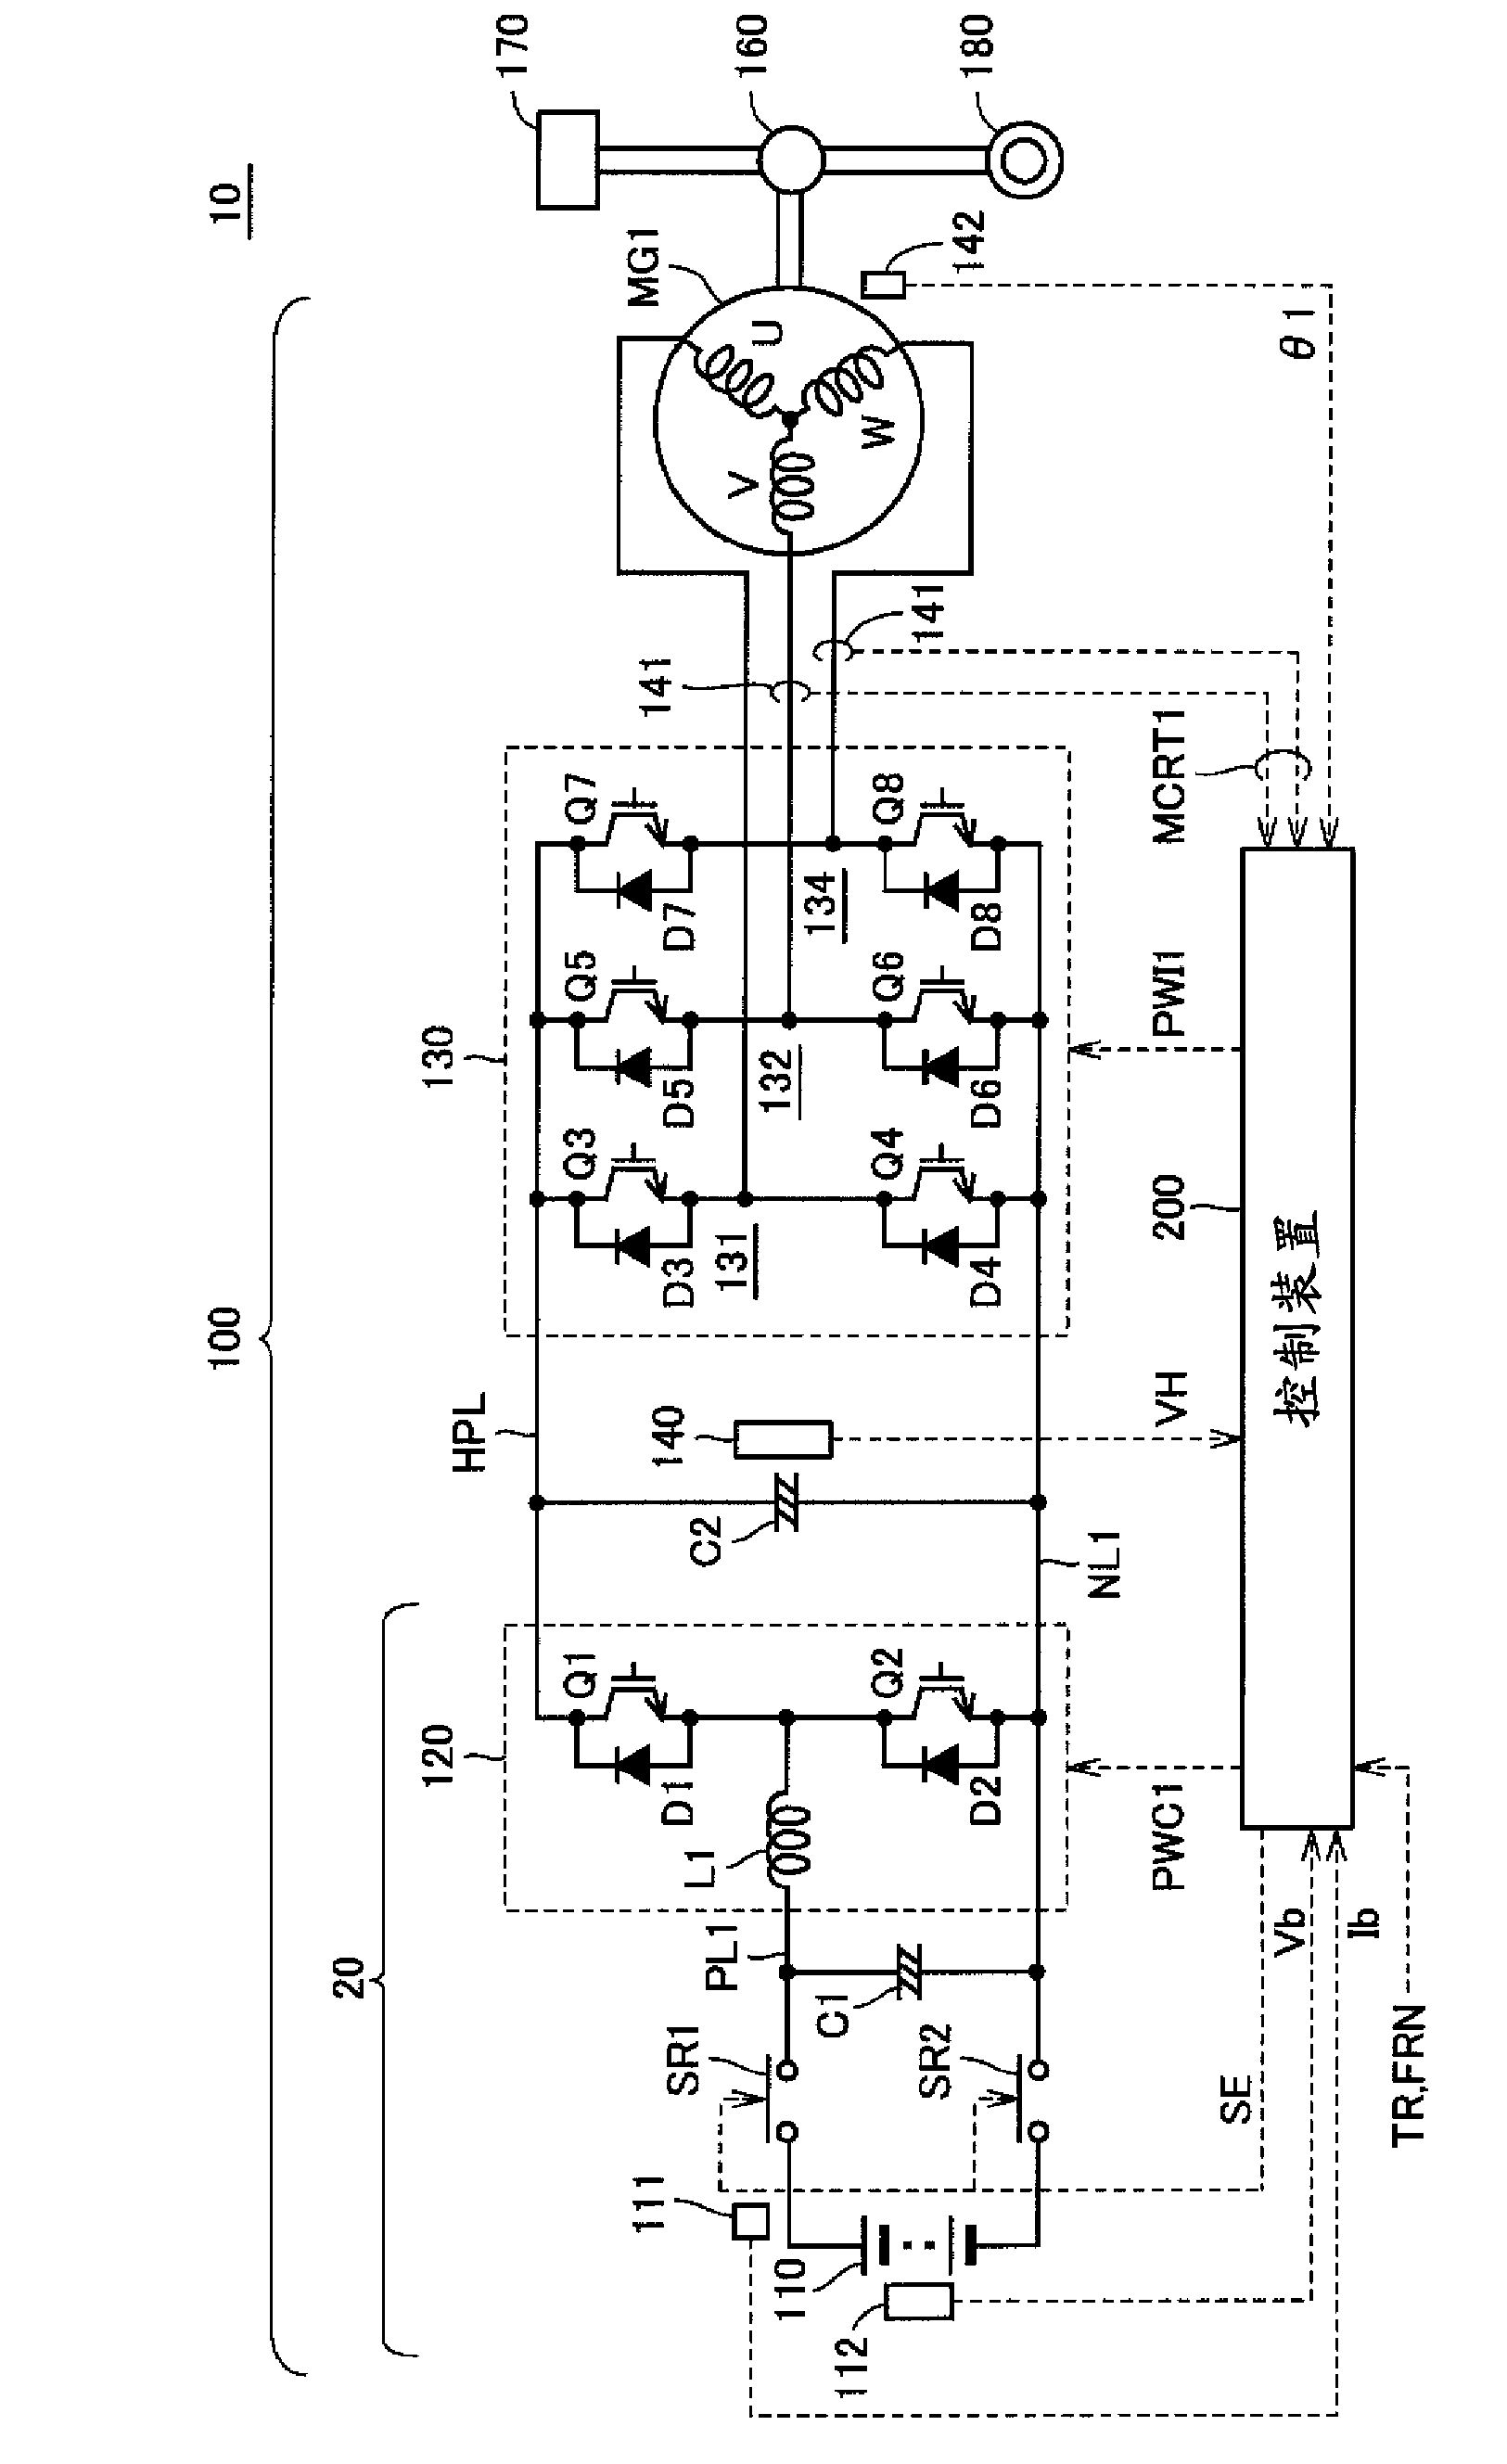 Control device for motor drive system and vehicle having same